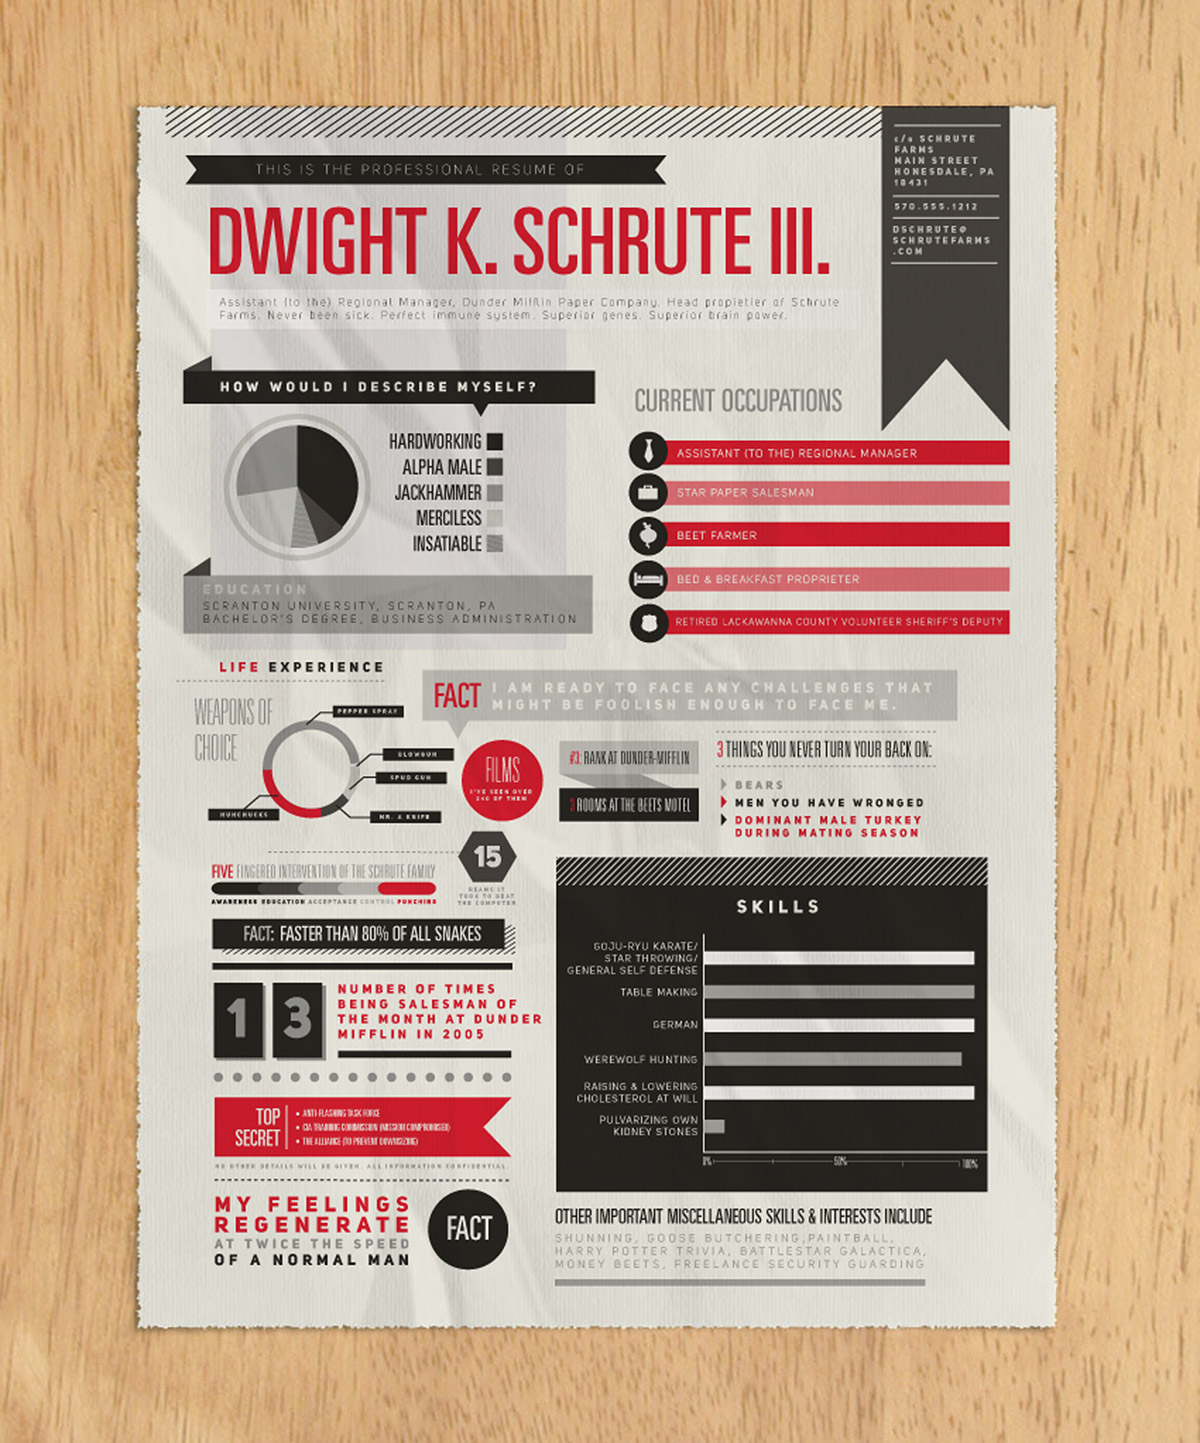 dwight schrute the office Resume infographics chart graph type sans serif fake anything Fun funny nbc rainn wilson 3 color font dwight k schrute dwight quotes dwight schrute quotes the office quotes office fan art pie chart pie graph red black